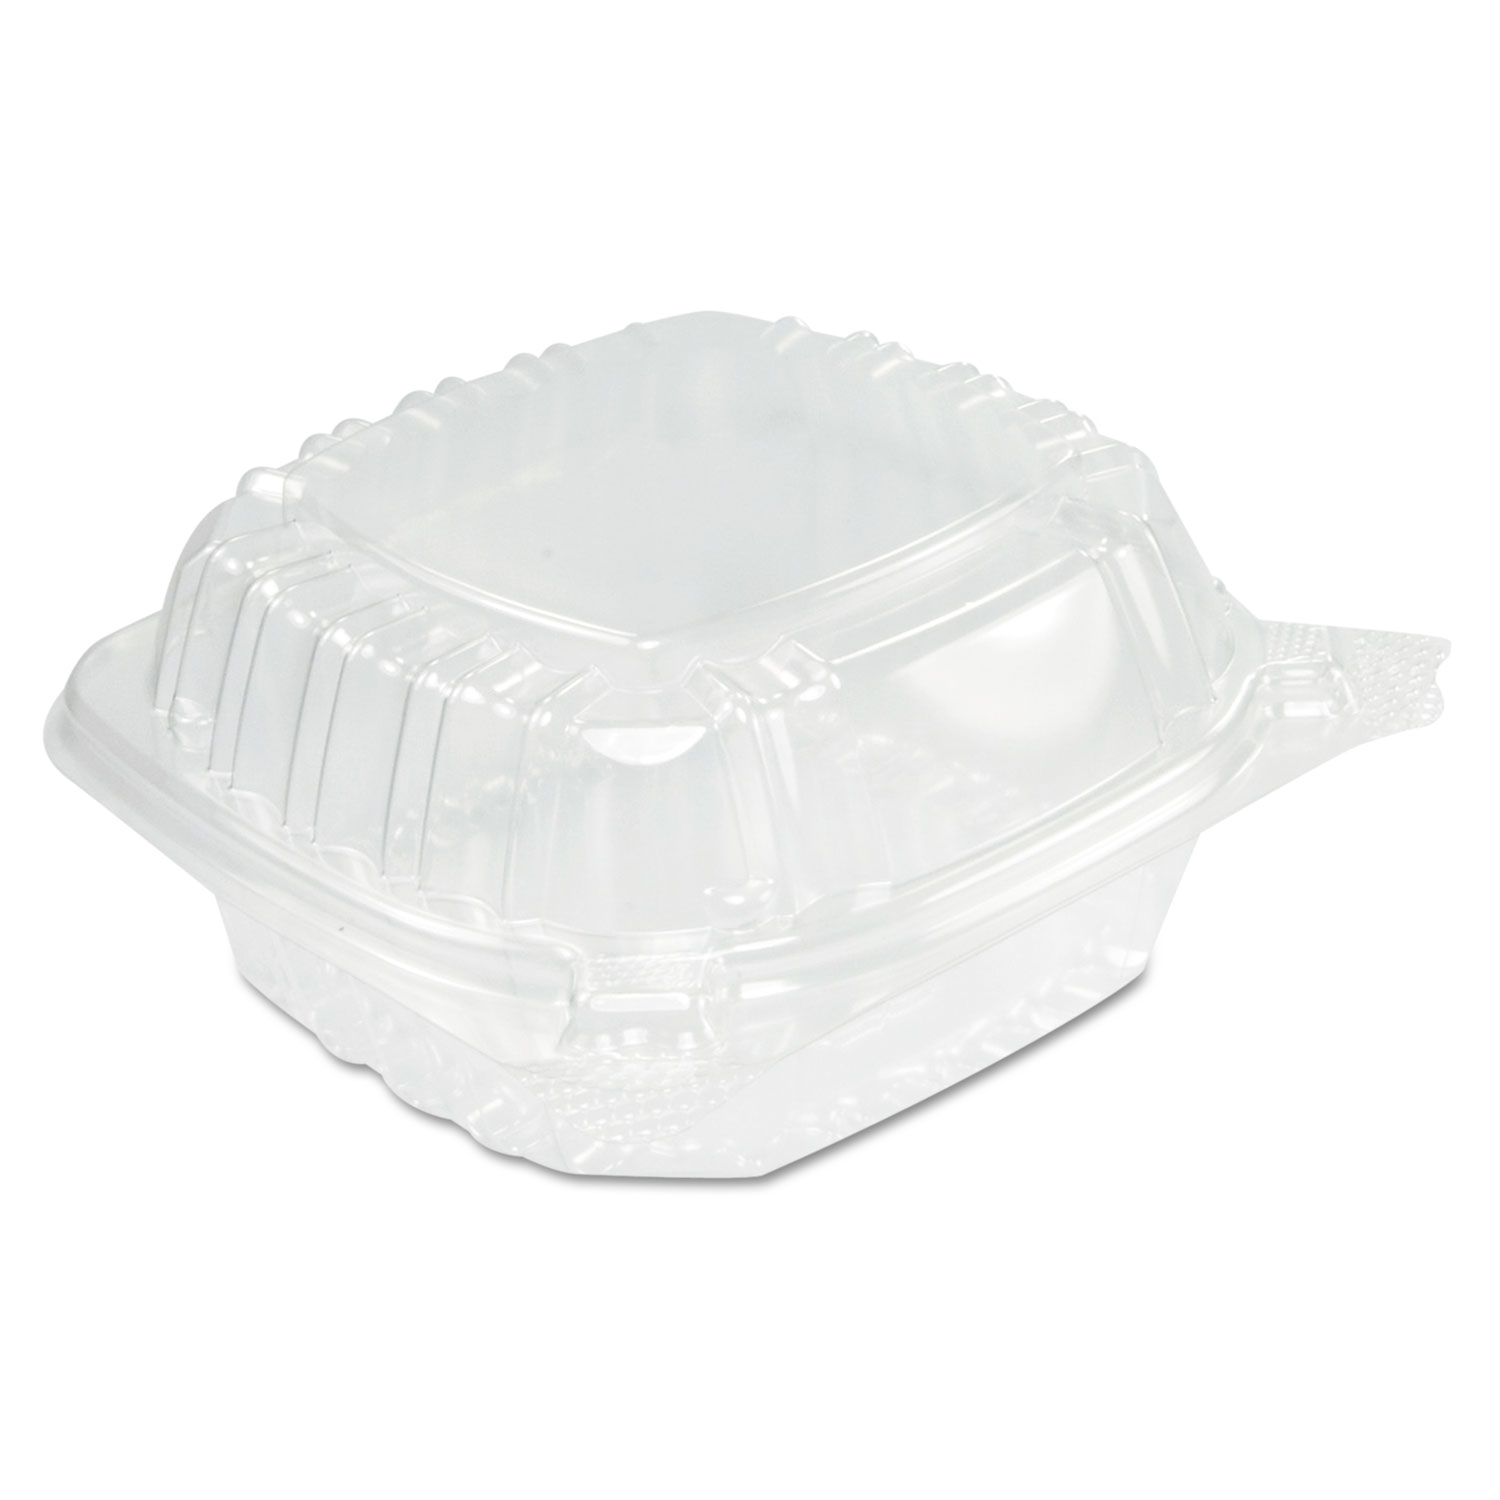 Deli Containers  8 oz. Sho Bowl with Hinged Dome Lid